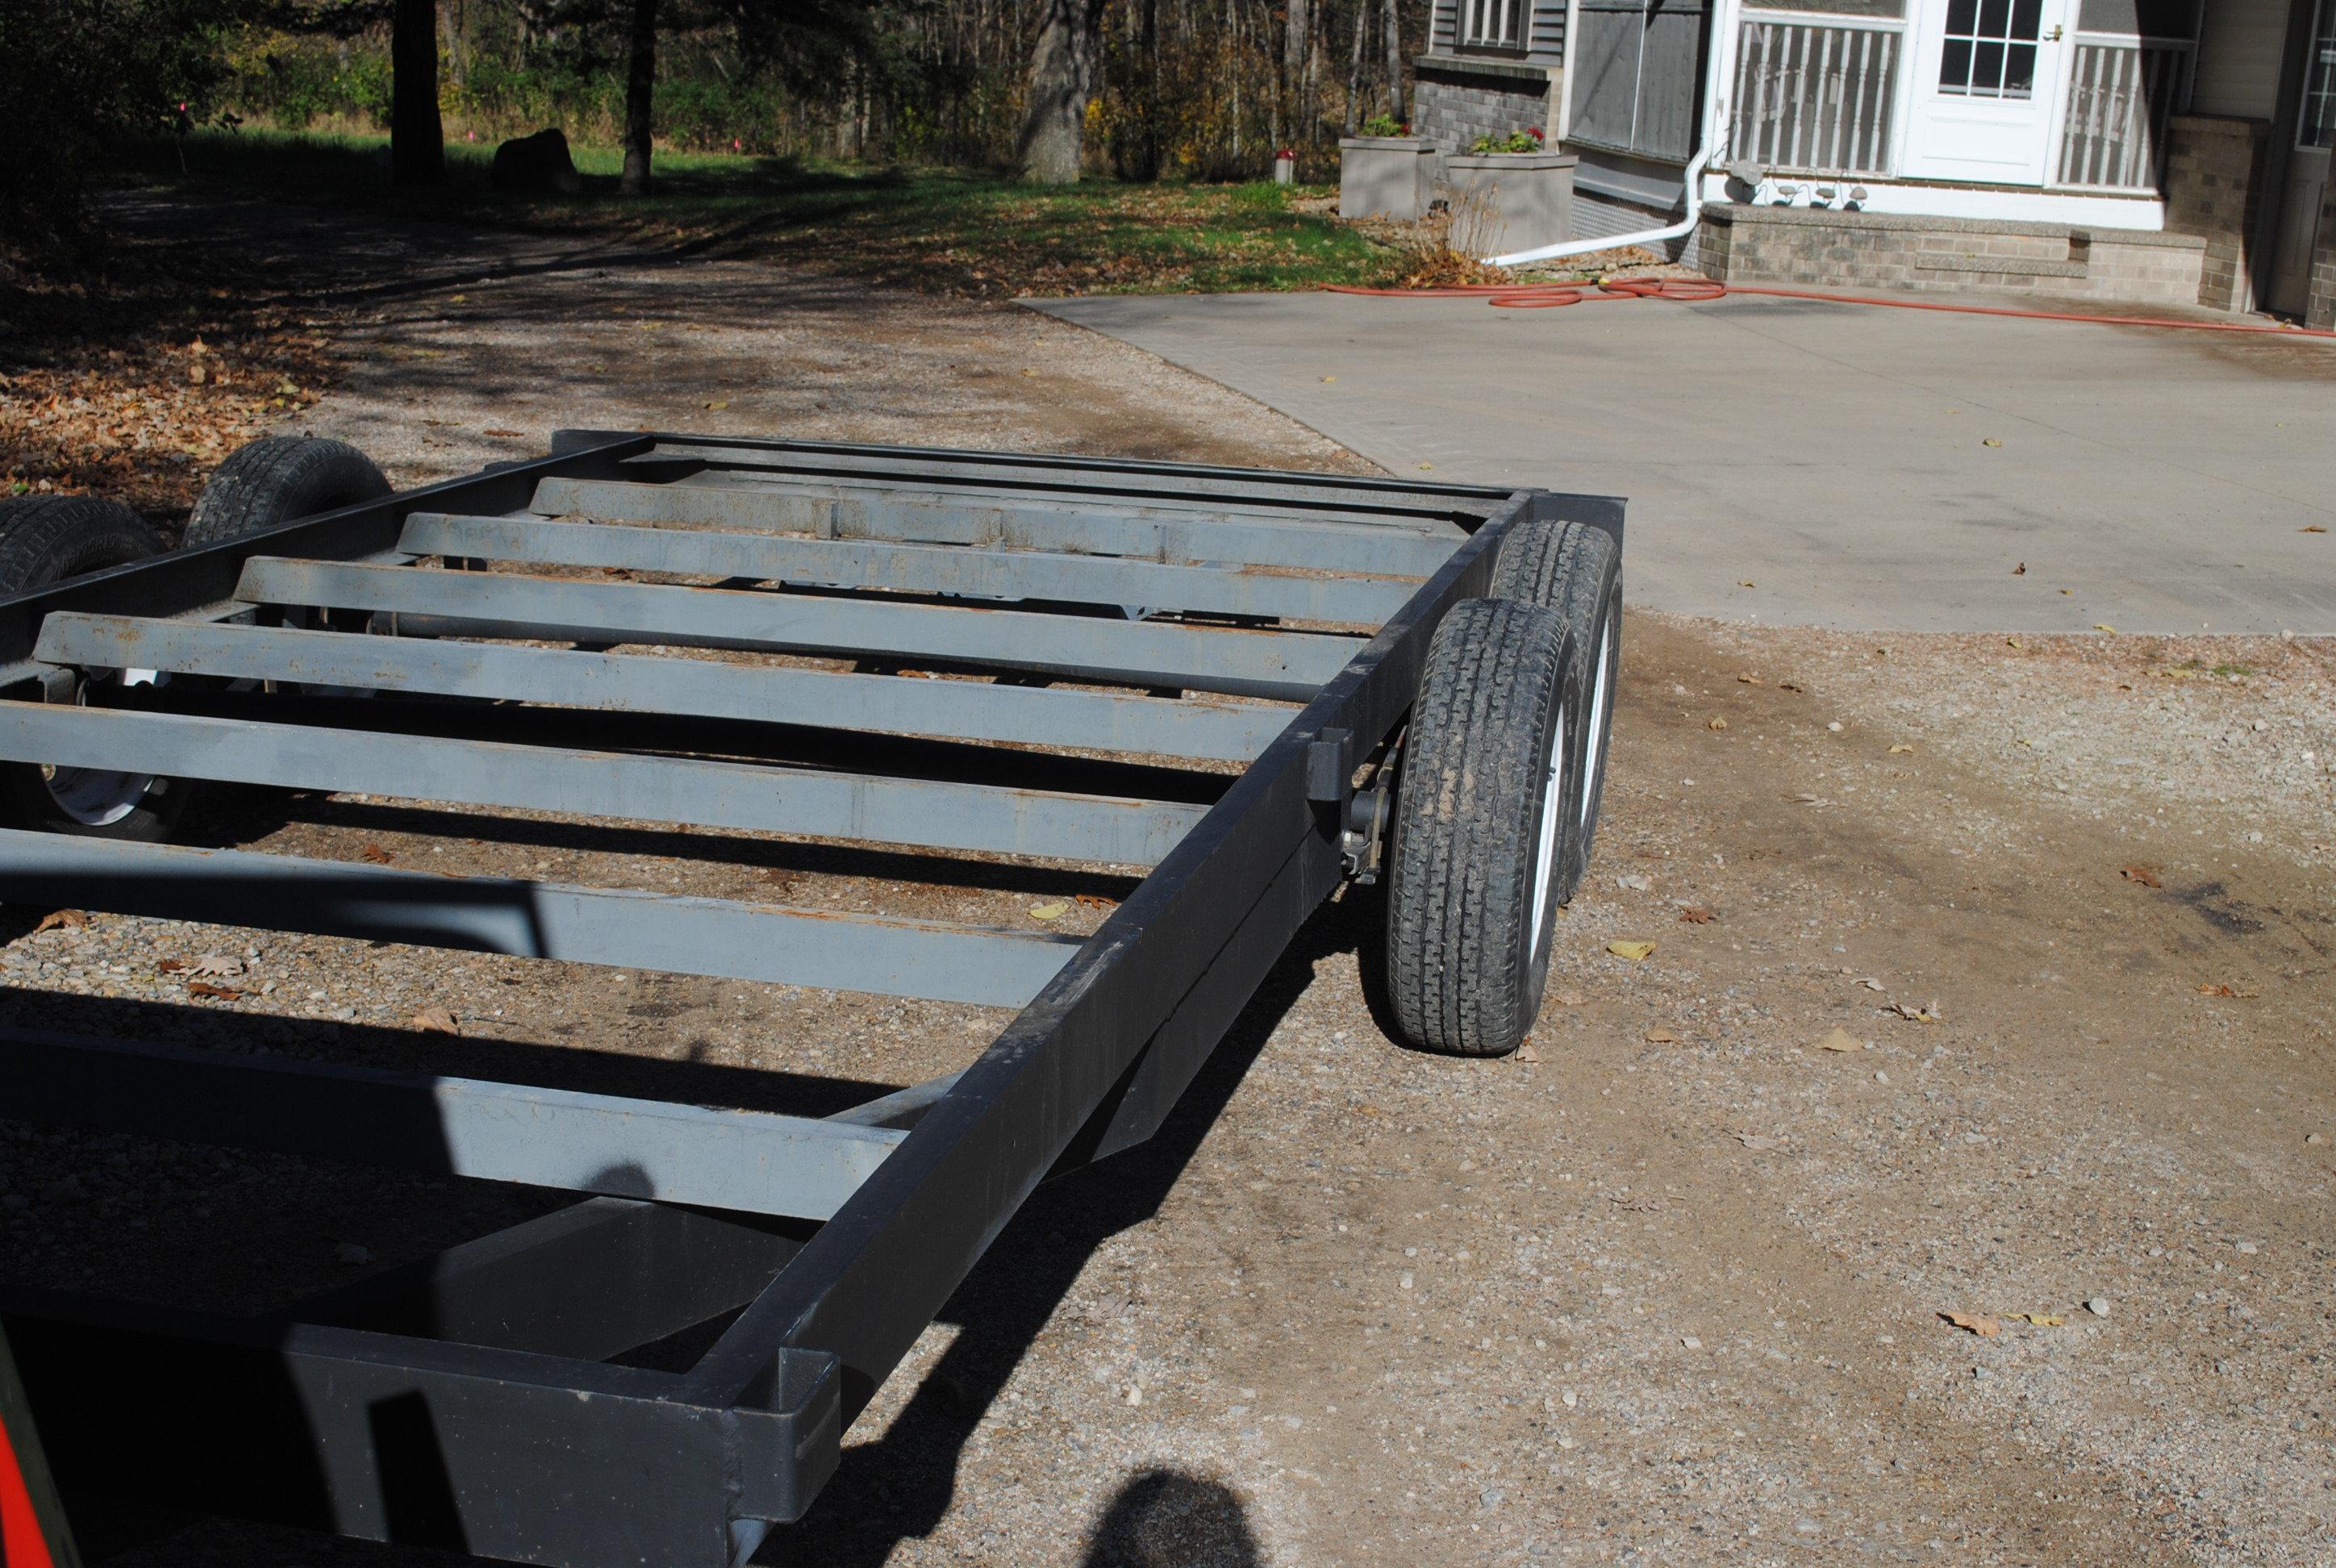 7' wide x 18' long flatbed car trailer frame with brand new ramps, new 3500# Dexter axles & new tire